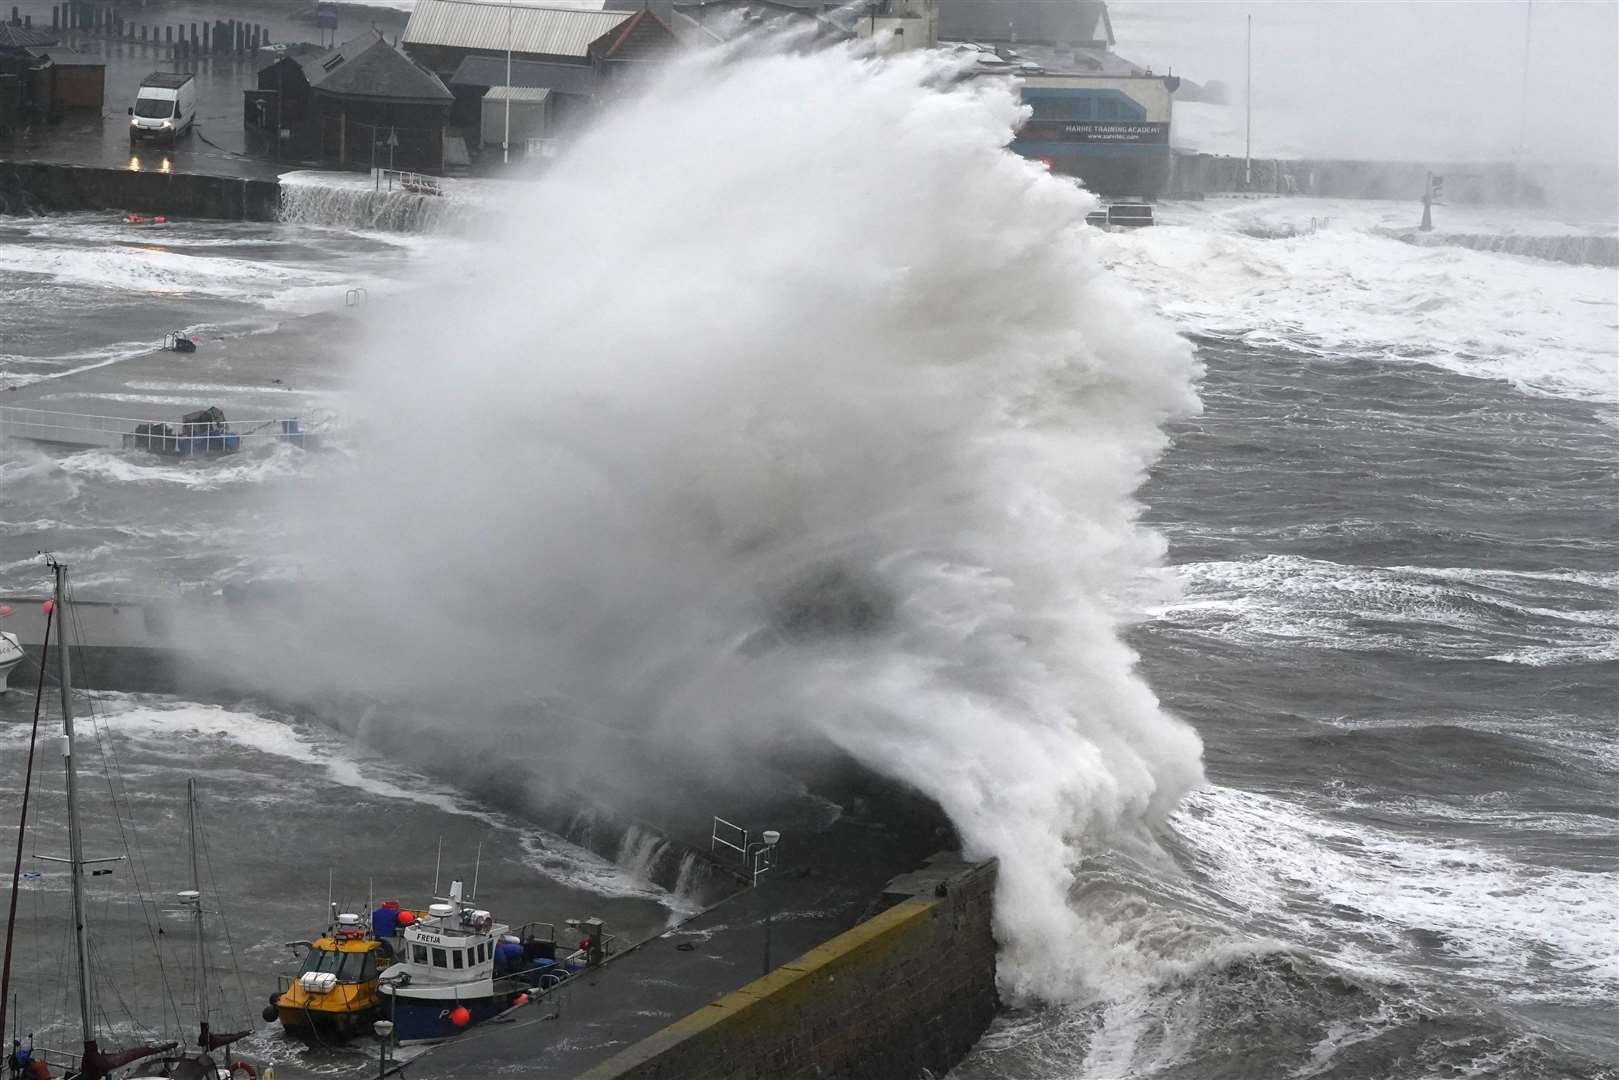 Huge waves hit the coast at Stonehaven in Aberdeenshire on Thursday afternoon (Andrew Milligan/PA)